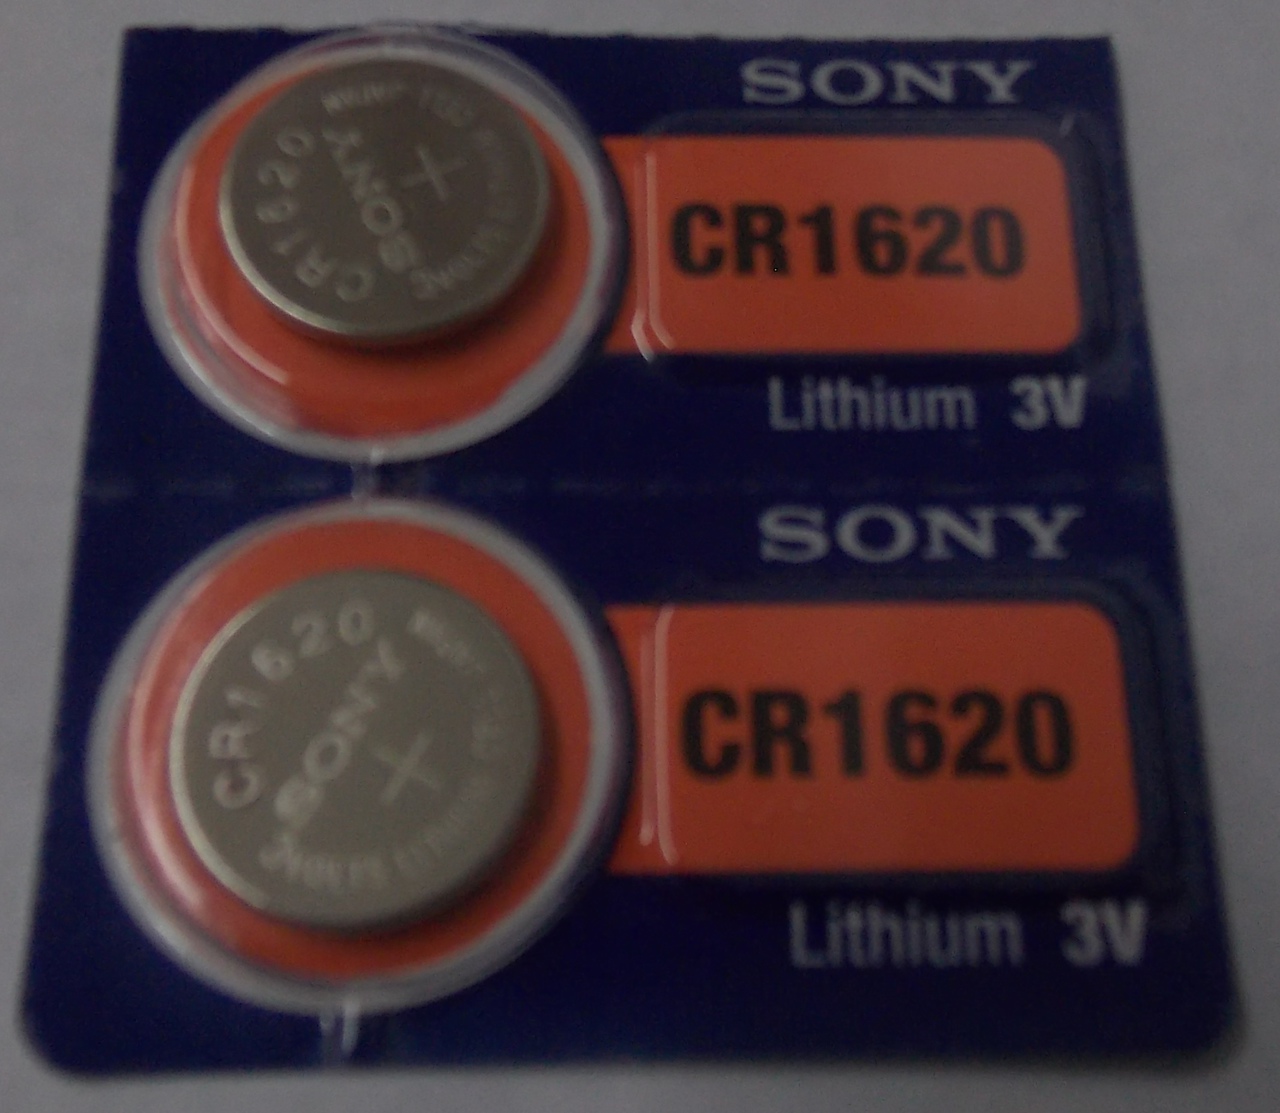 Sony CR1620 3V Lithium Coin Battery - 2 Pack + FREE SHIPPING!